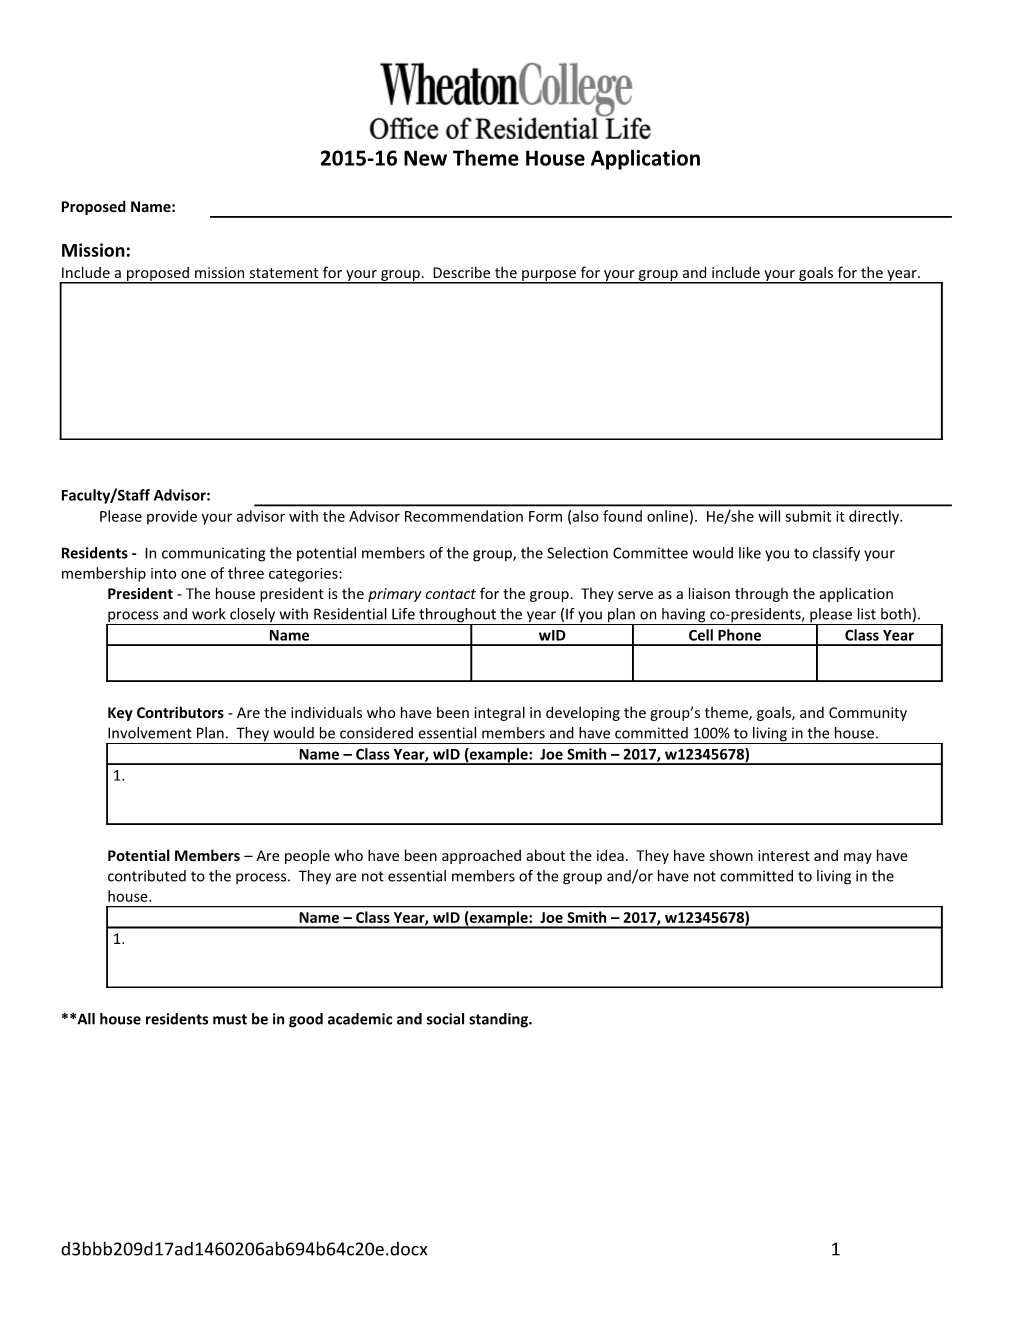 2015-16New Theme House Application